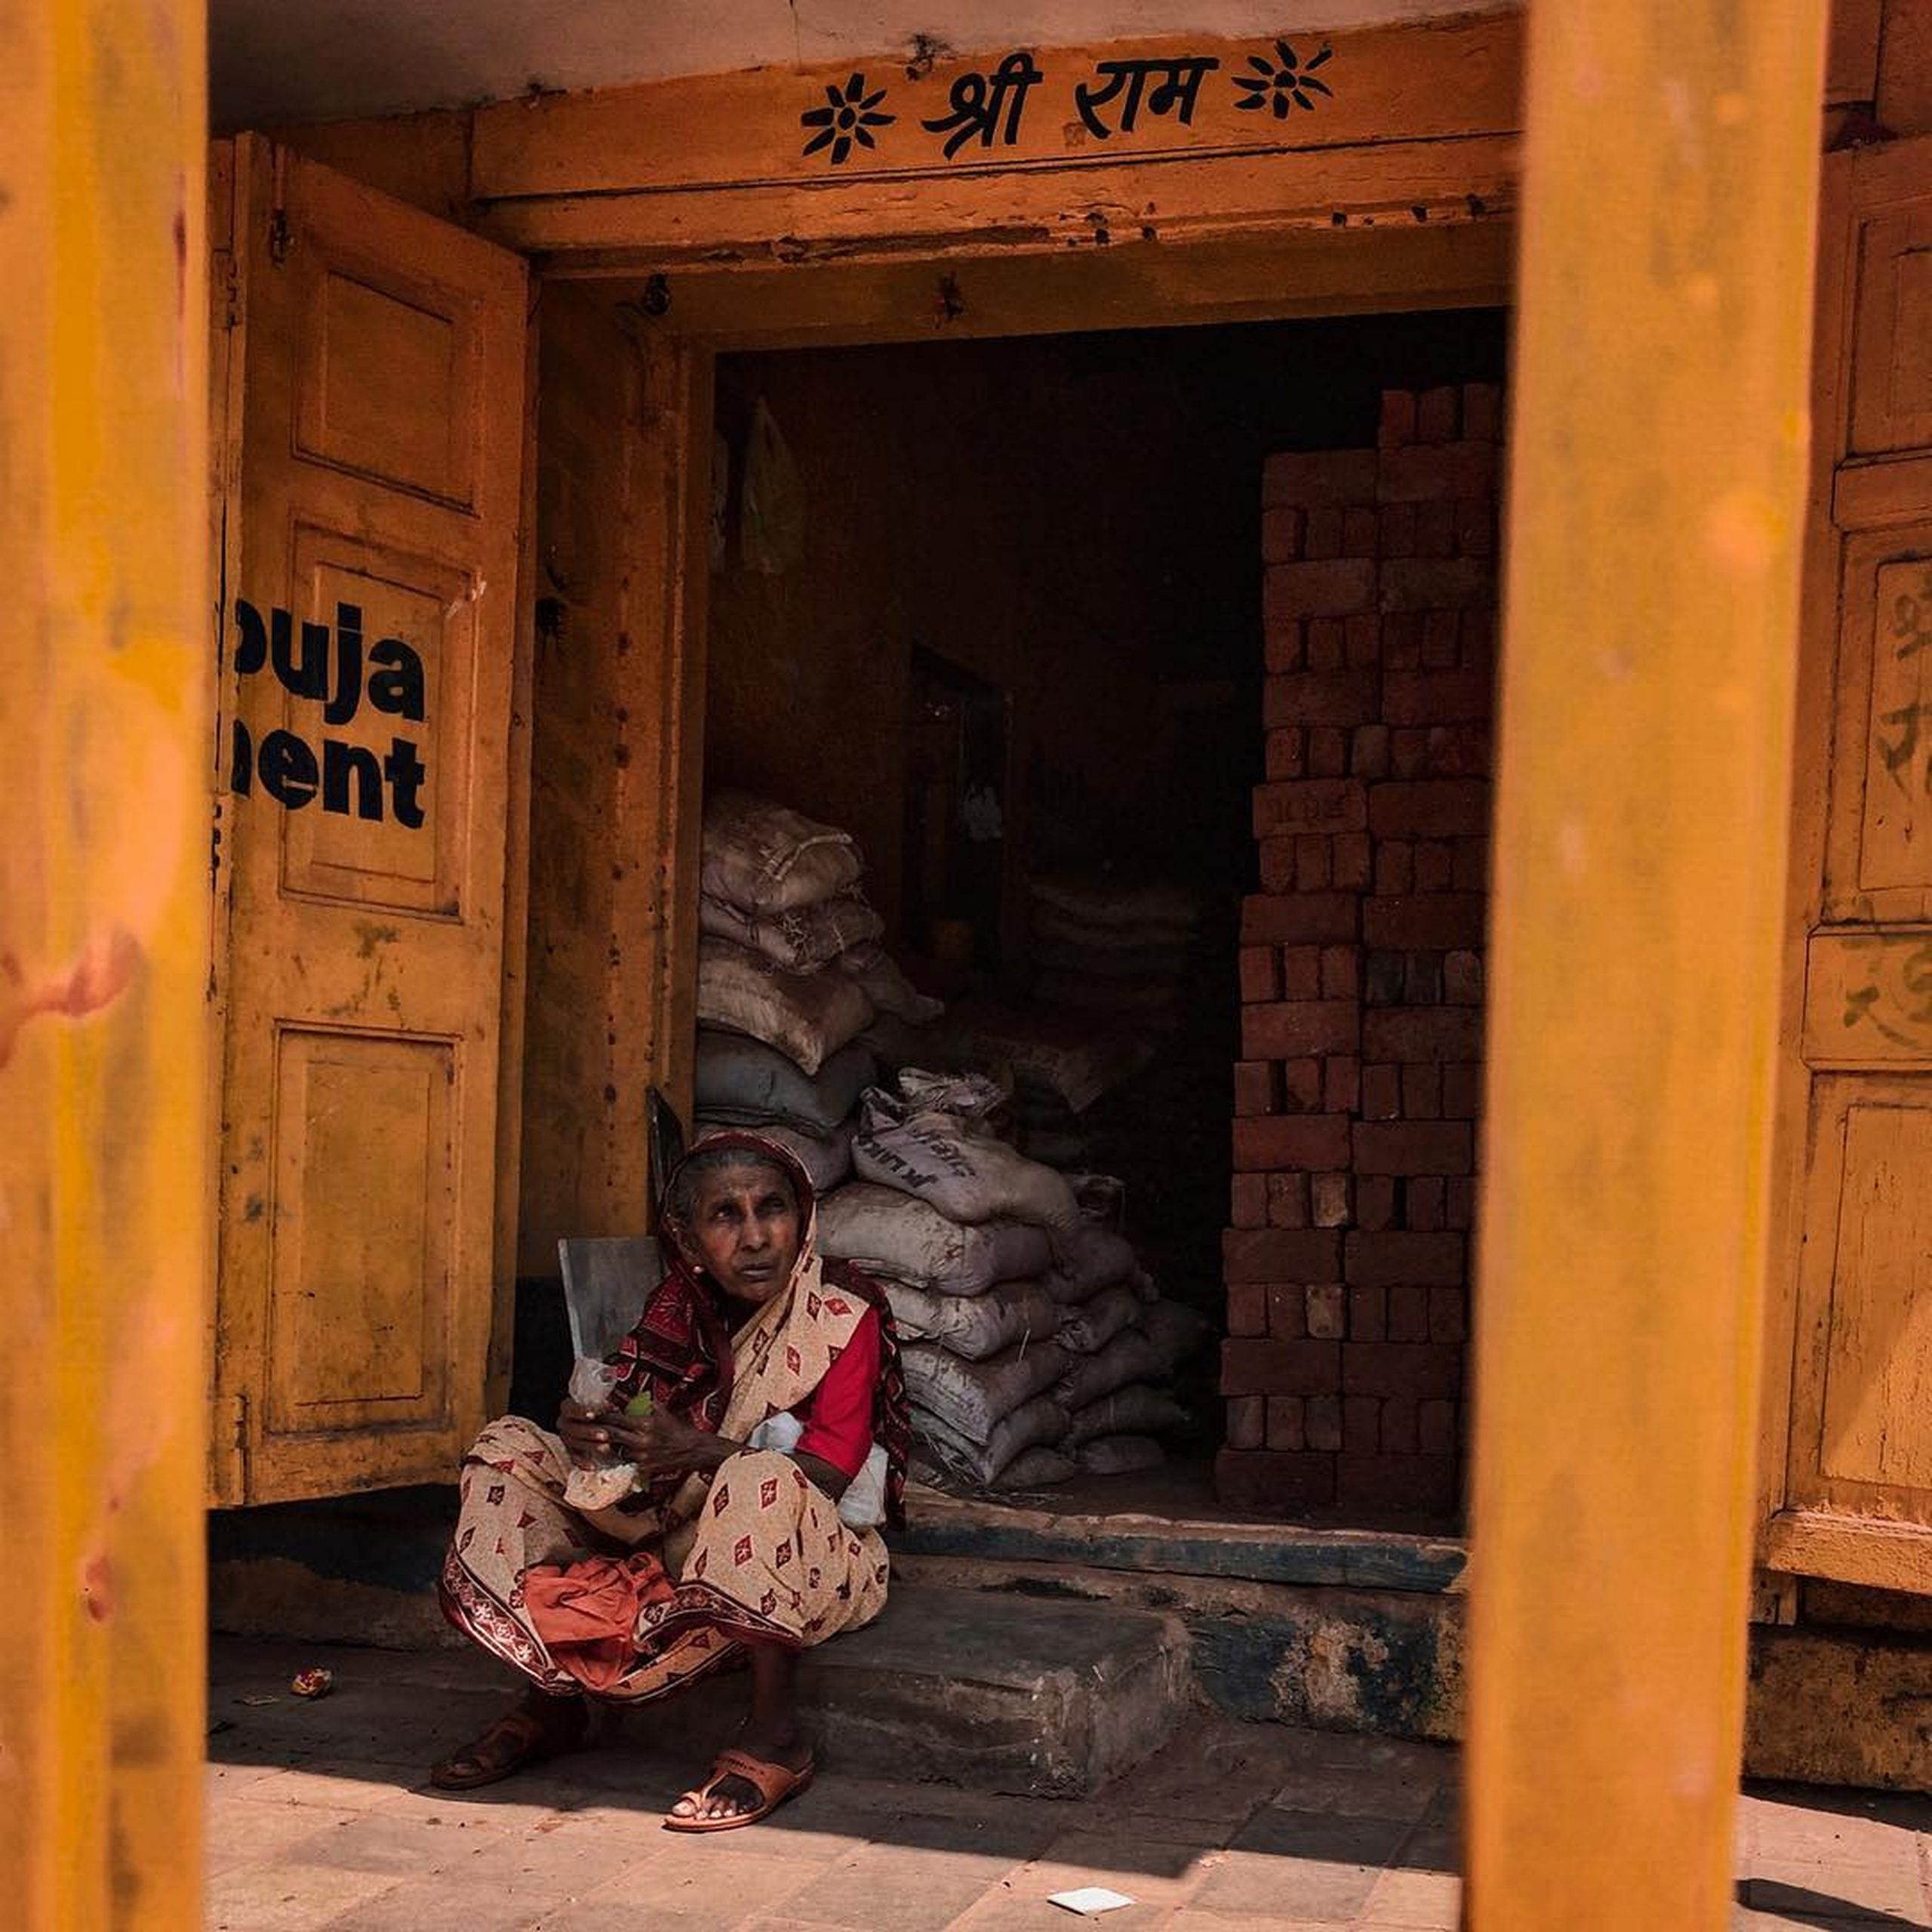 An old lady in bricks and cement shop